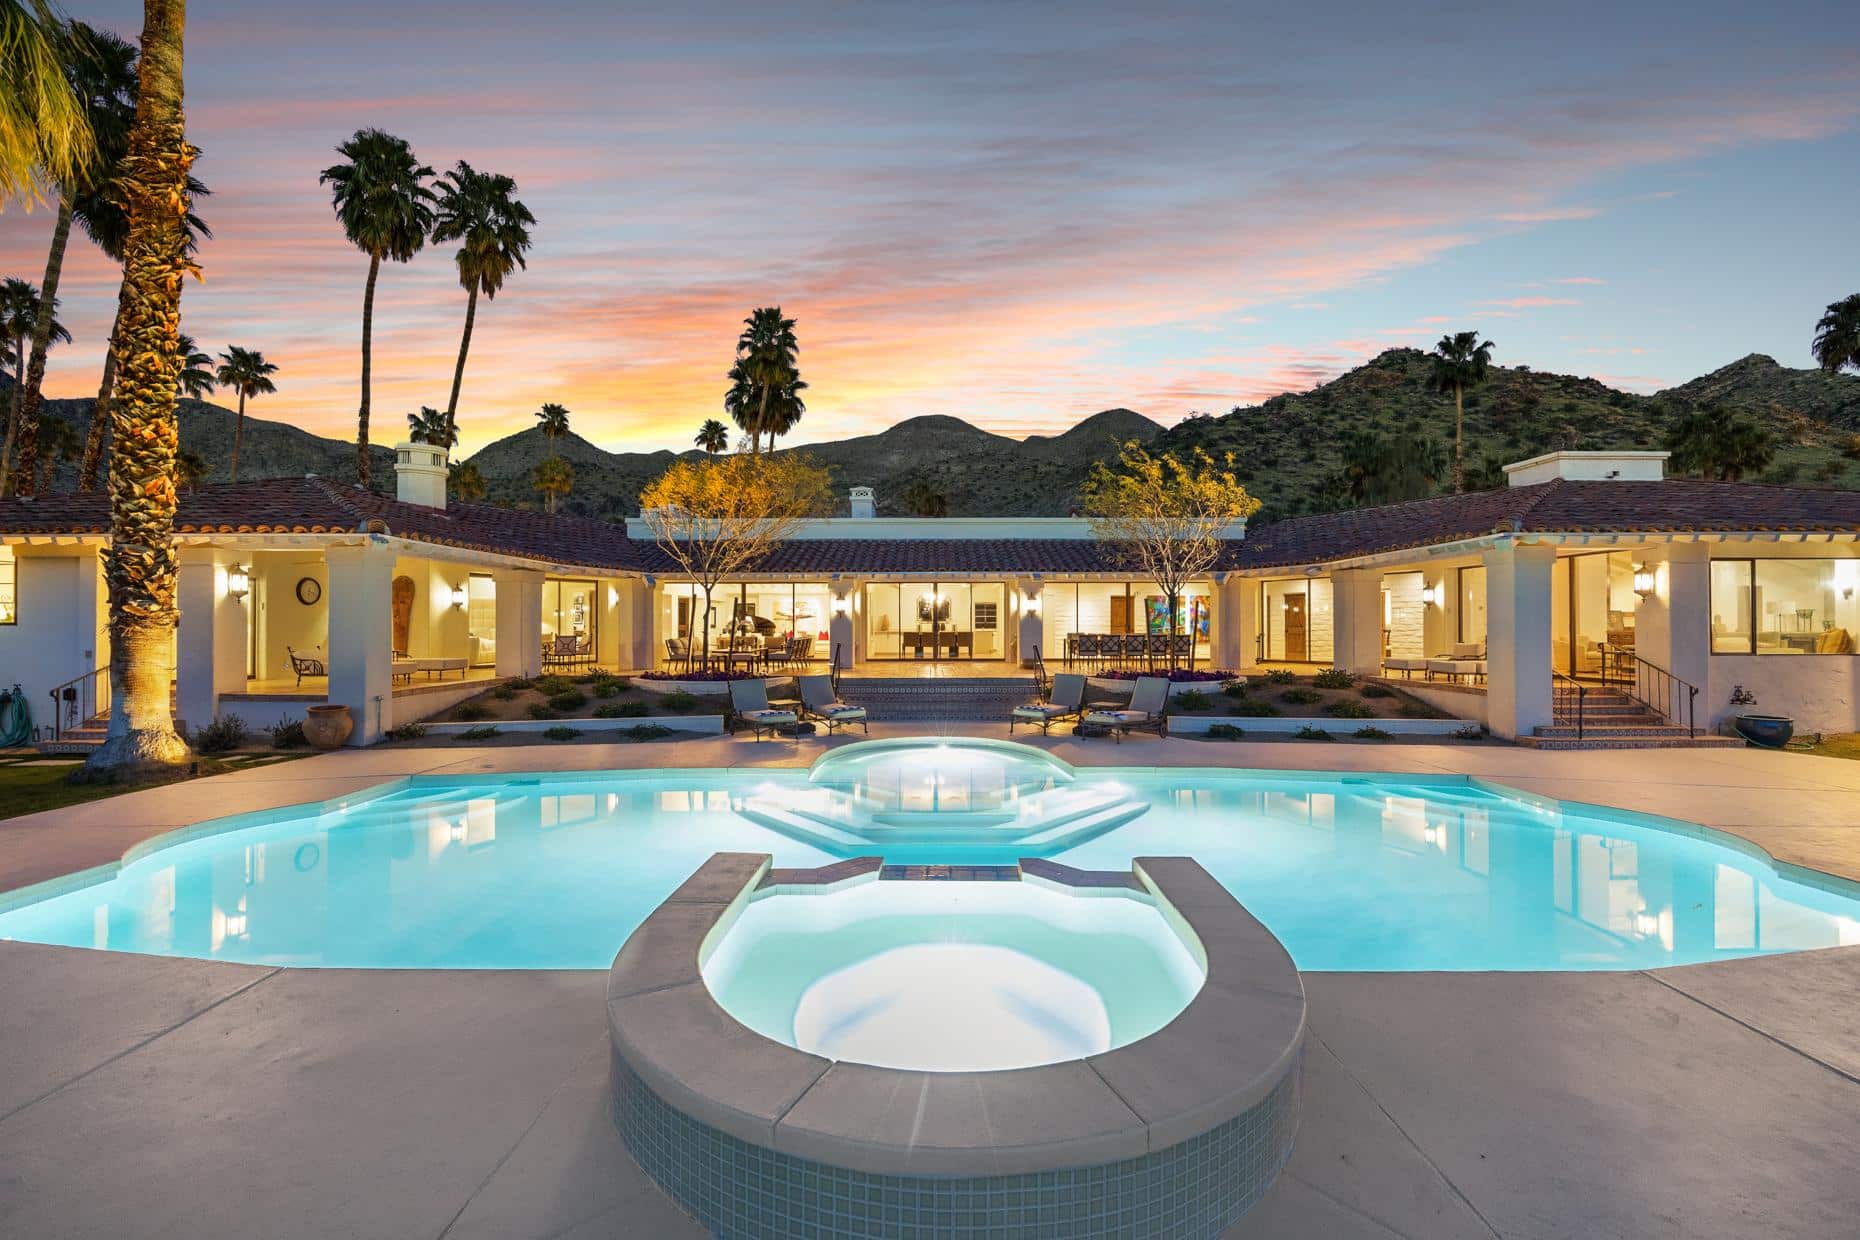 A luxurious pool area in front of a single-story villa at twilight, with lit interior rooms, outdoor furniture, palm trees, and a mountainous backdrop under a colorful sunset sky.